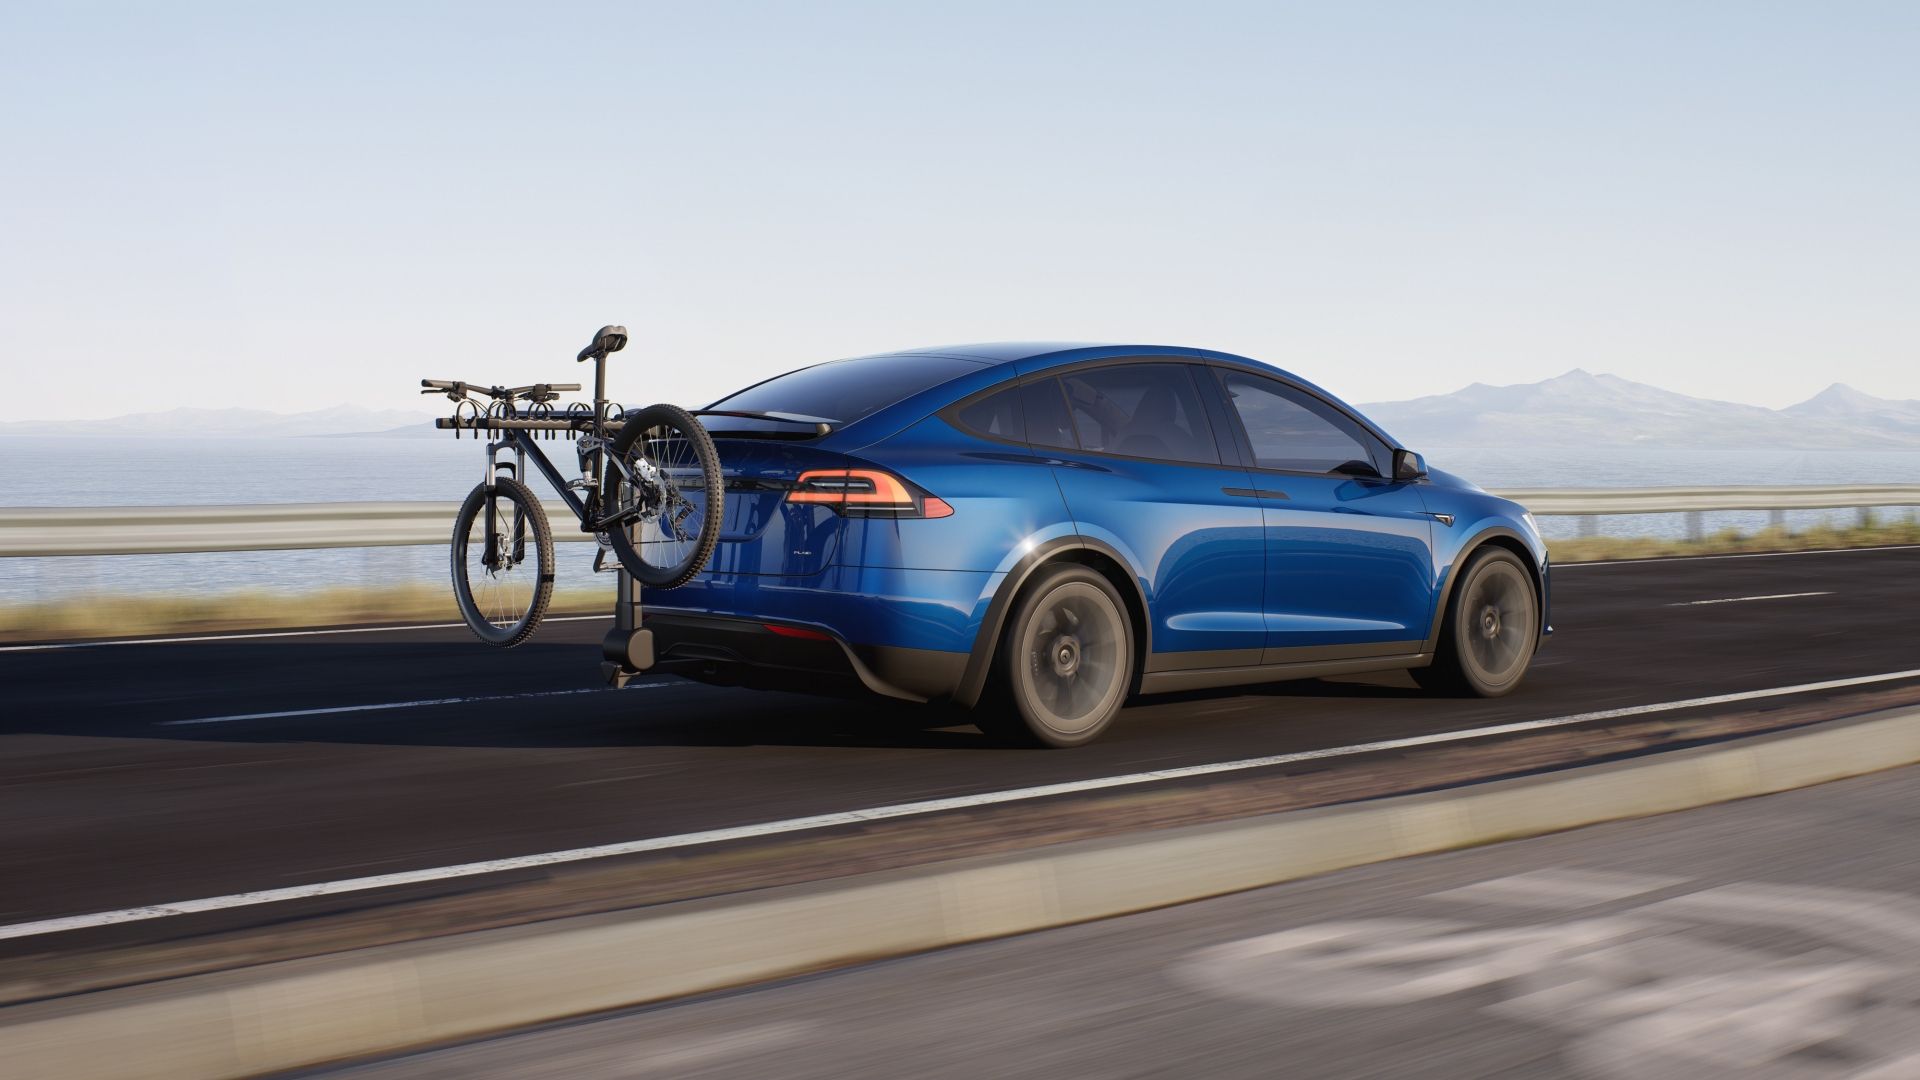 An action shot of the Tesla Model X